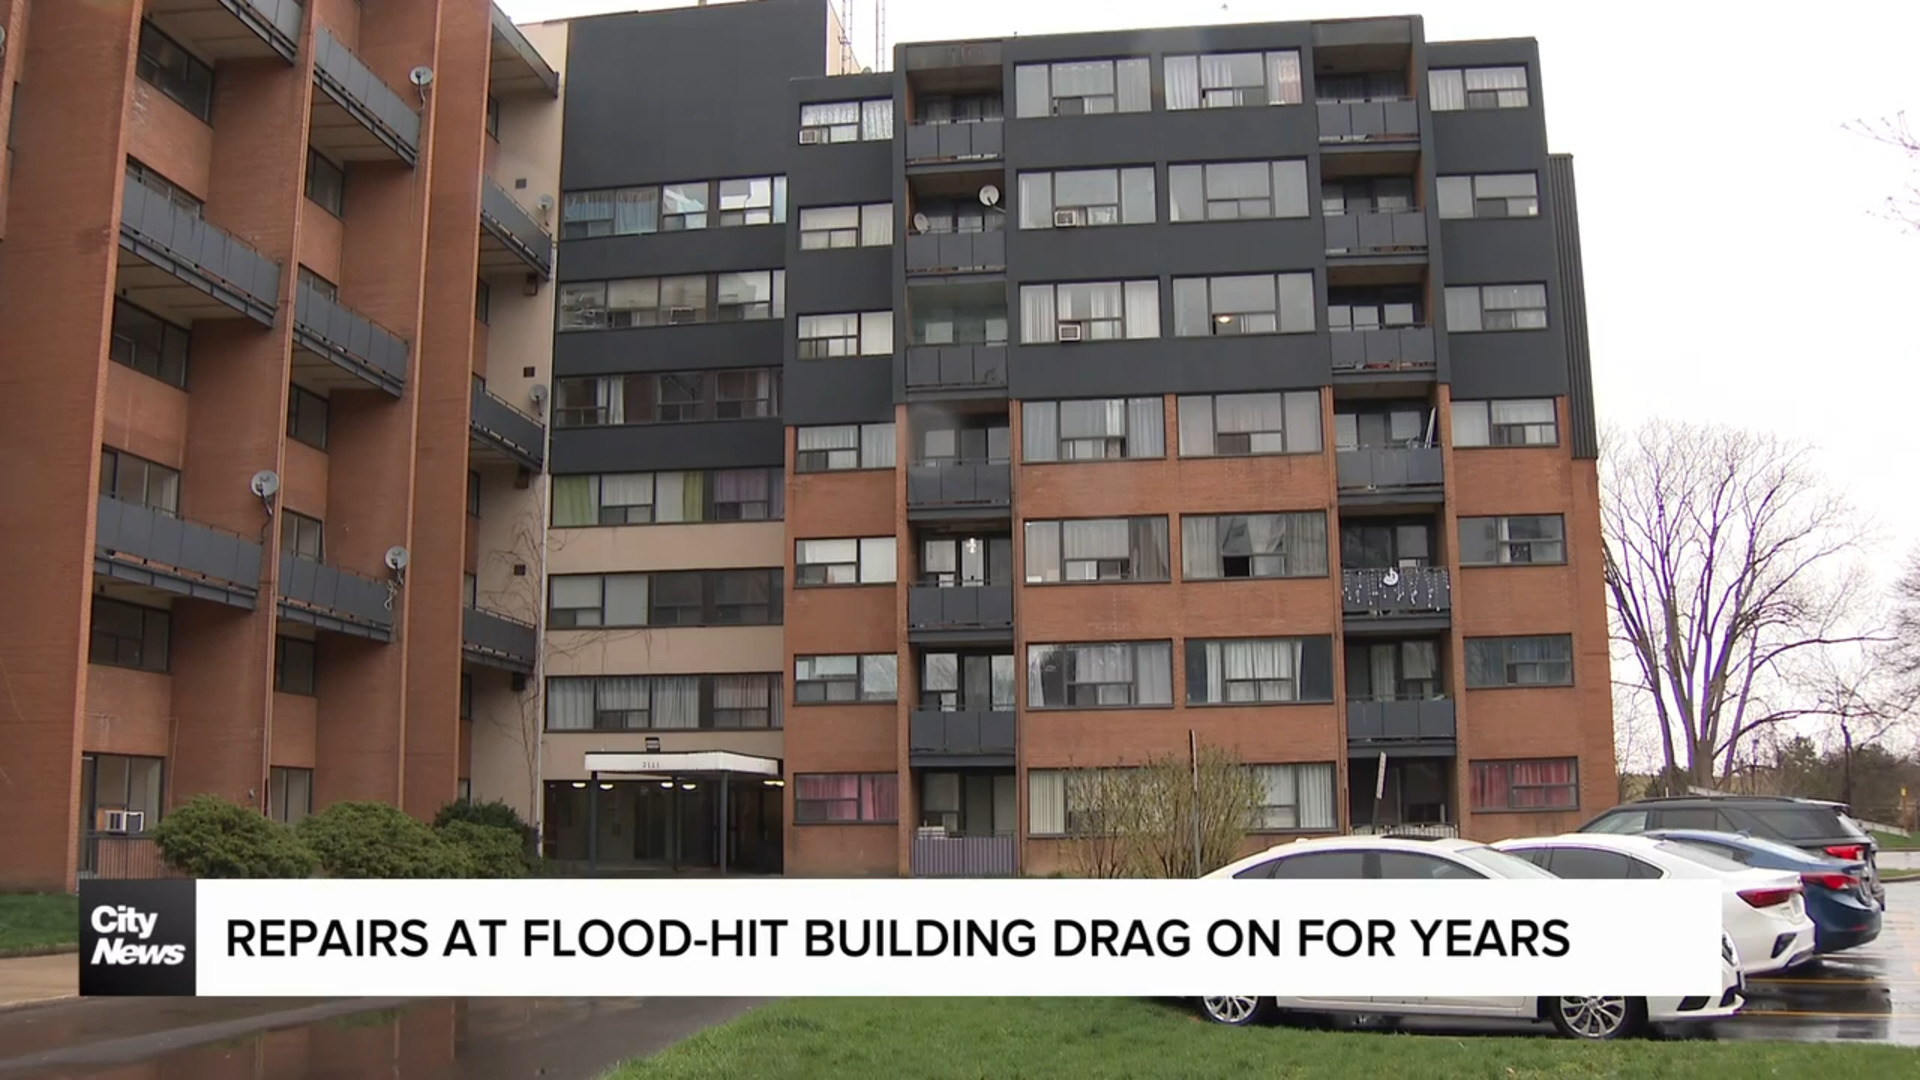 Repairs at flood-hit building drag on for years